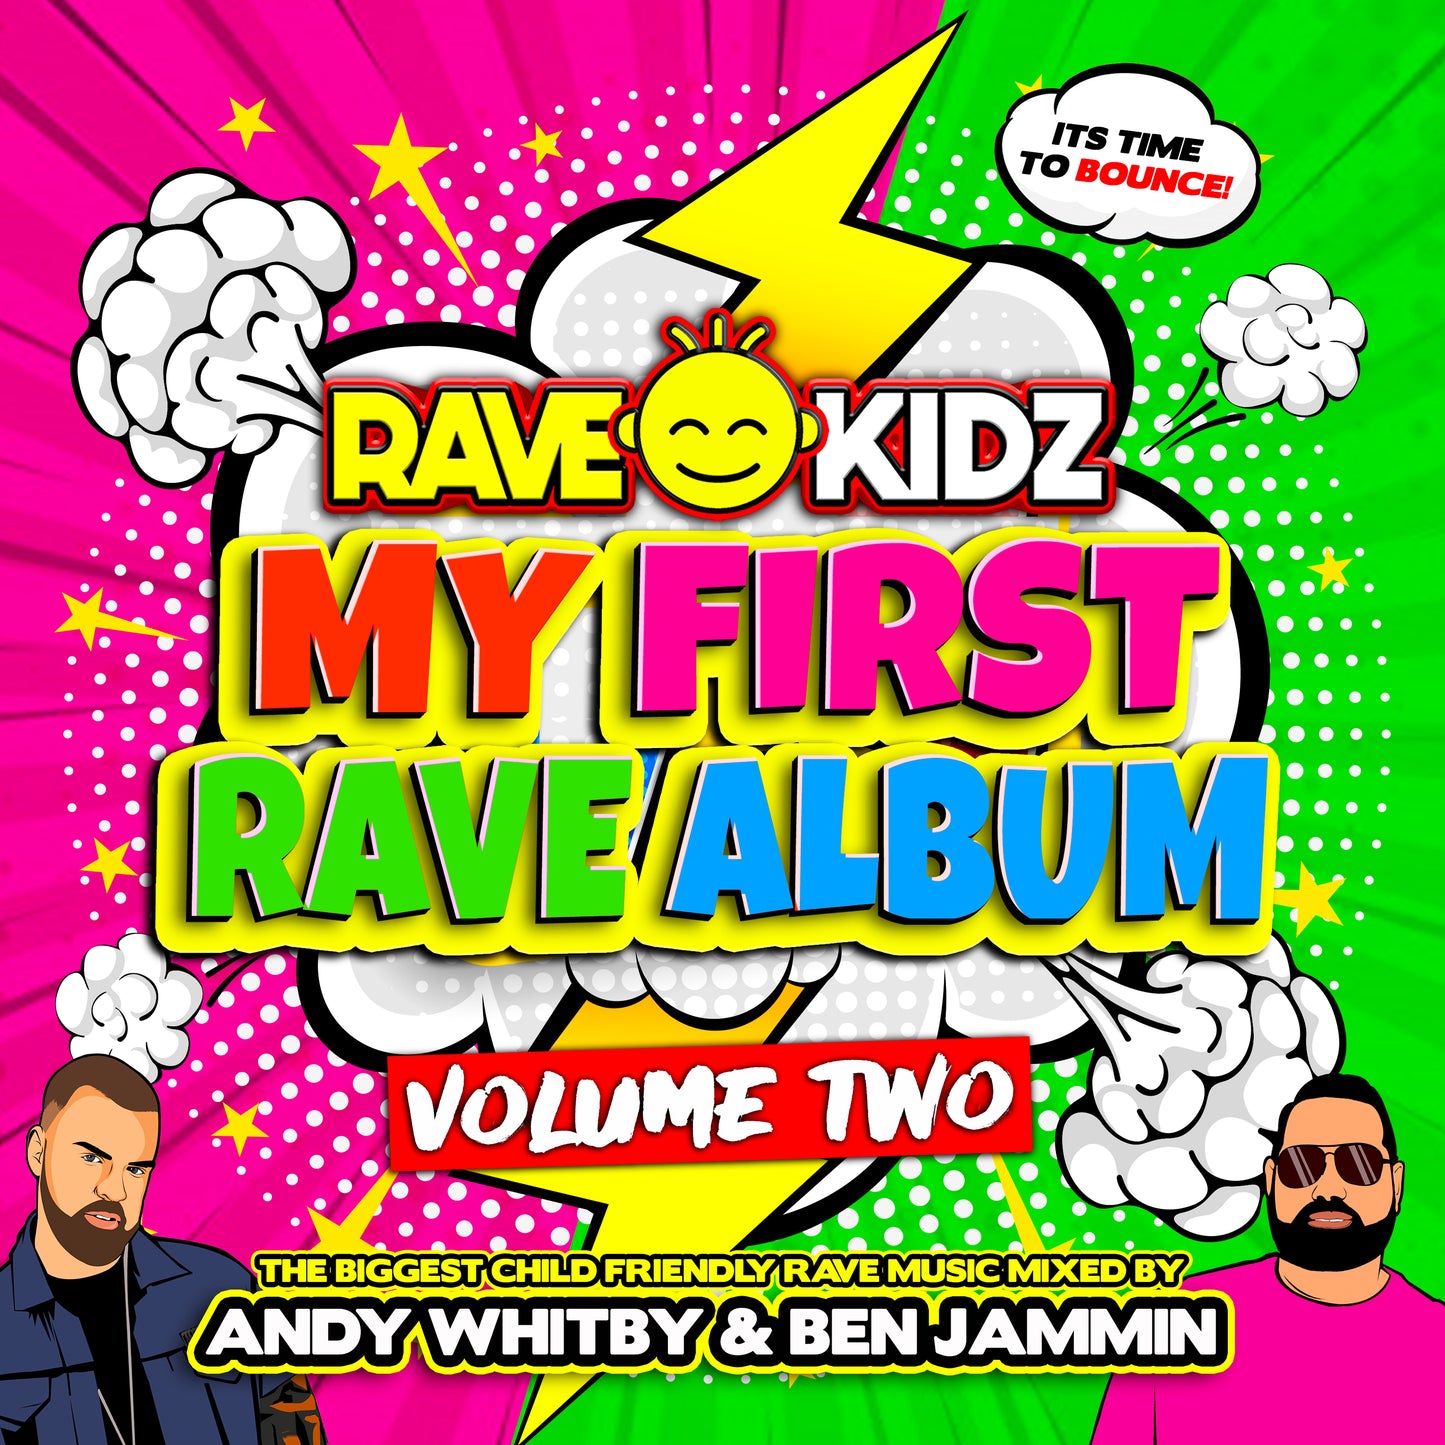 Rave Kidz Album 2 mixed by Andy Whitby & Ben Jammin (2CD)